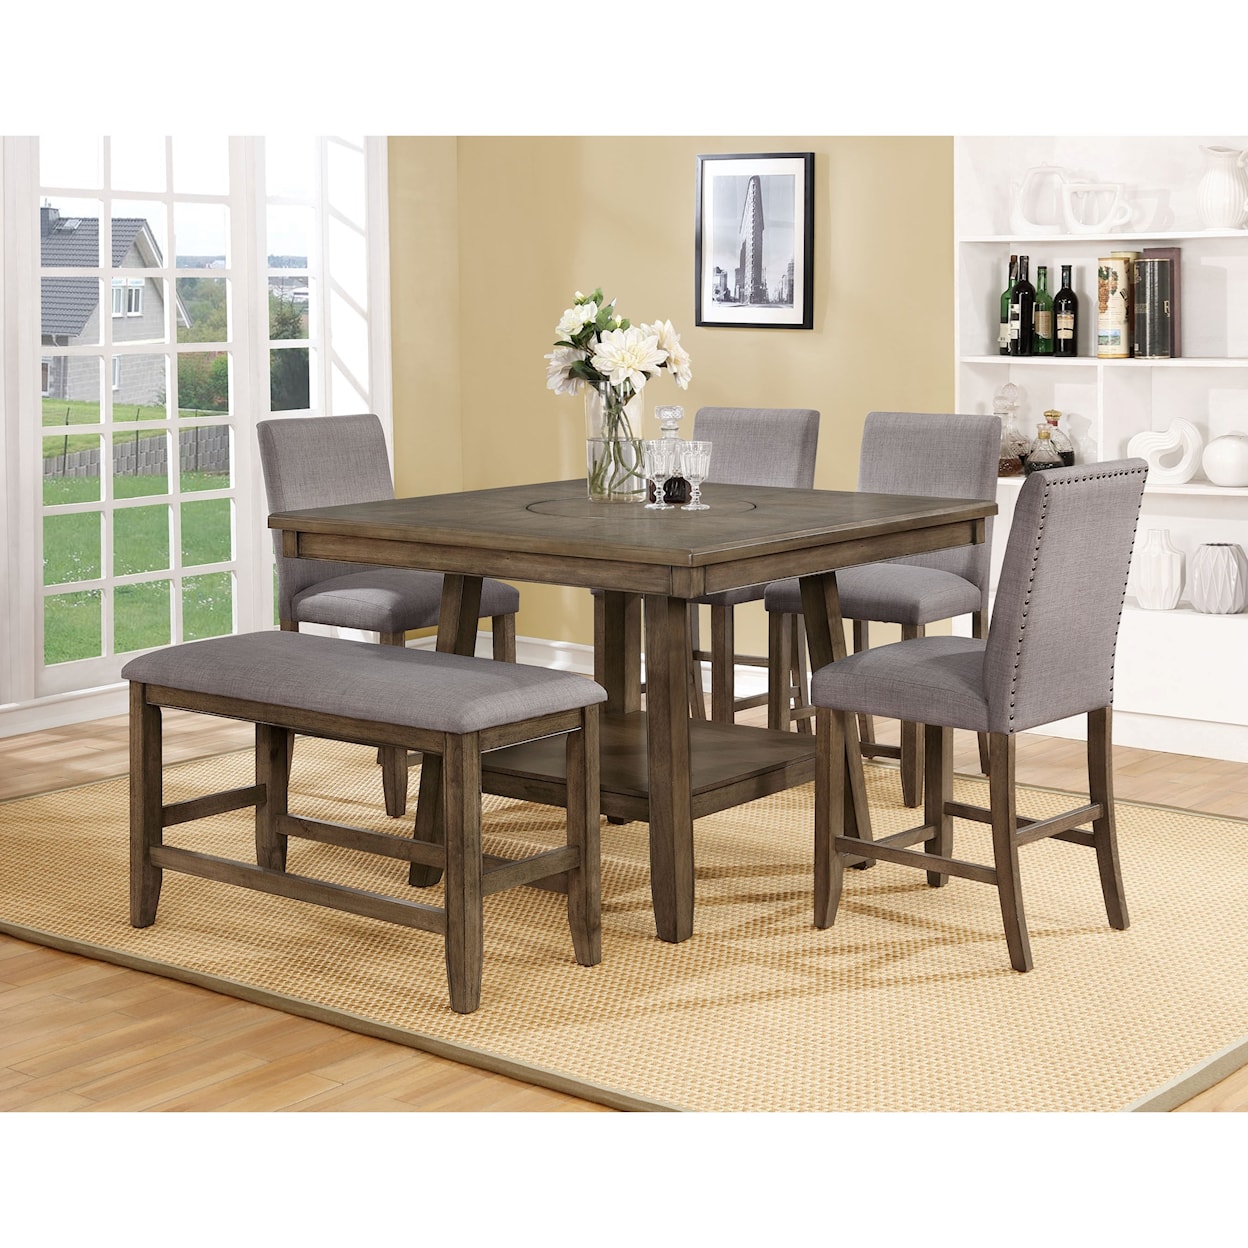 Crown Mark Manning 6 Pc Dining Group with Bench